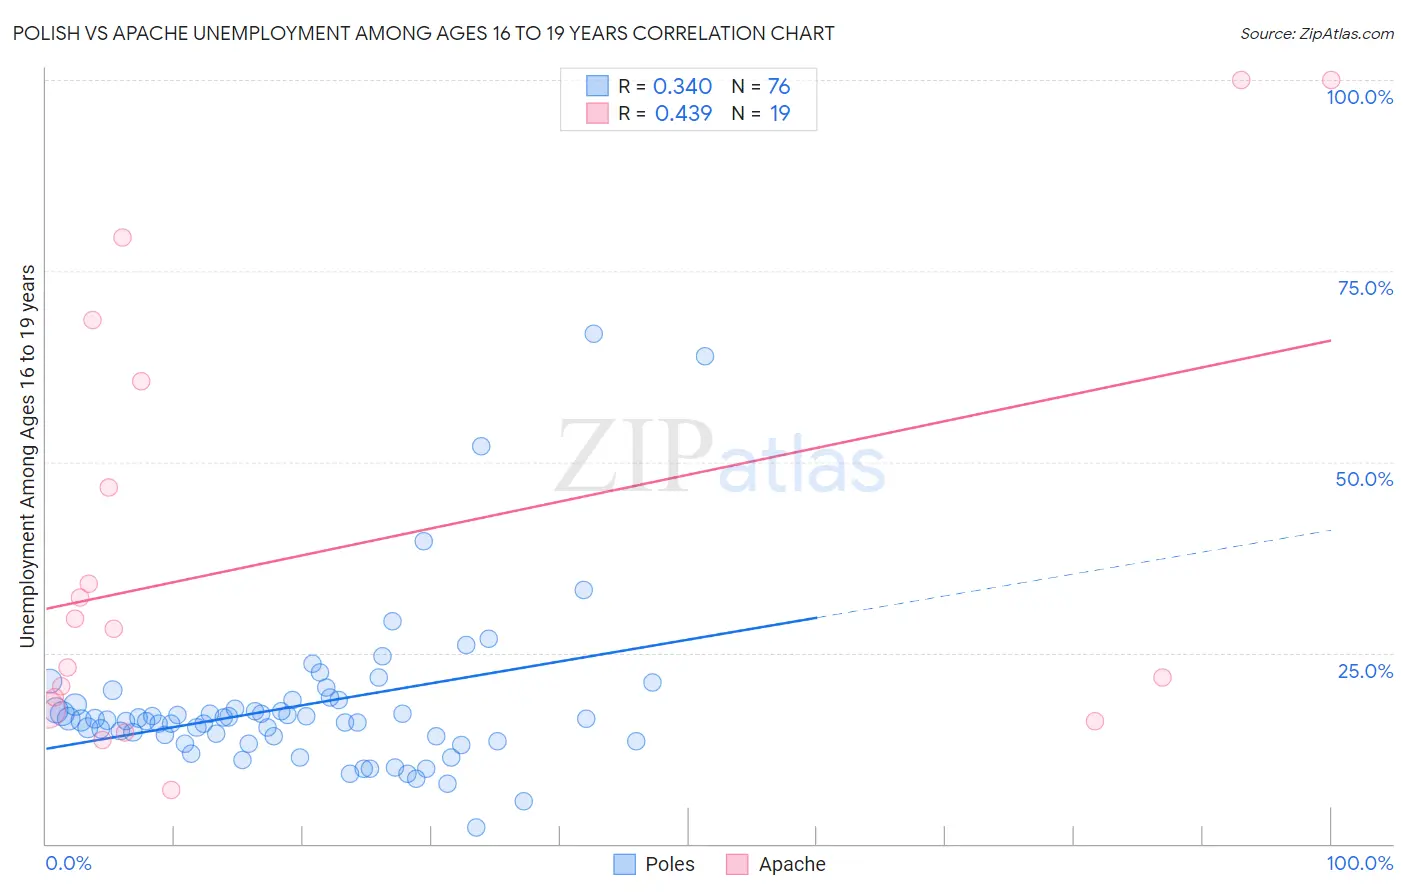 Polish vs Apache Unemployment Among Ages 16 to 19 years